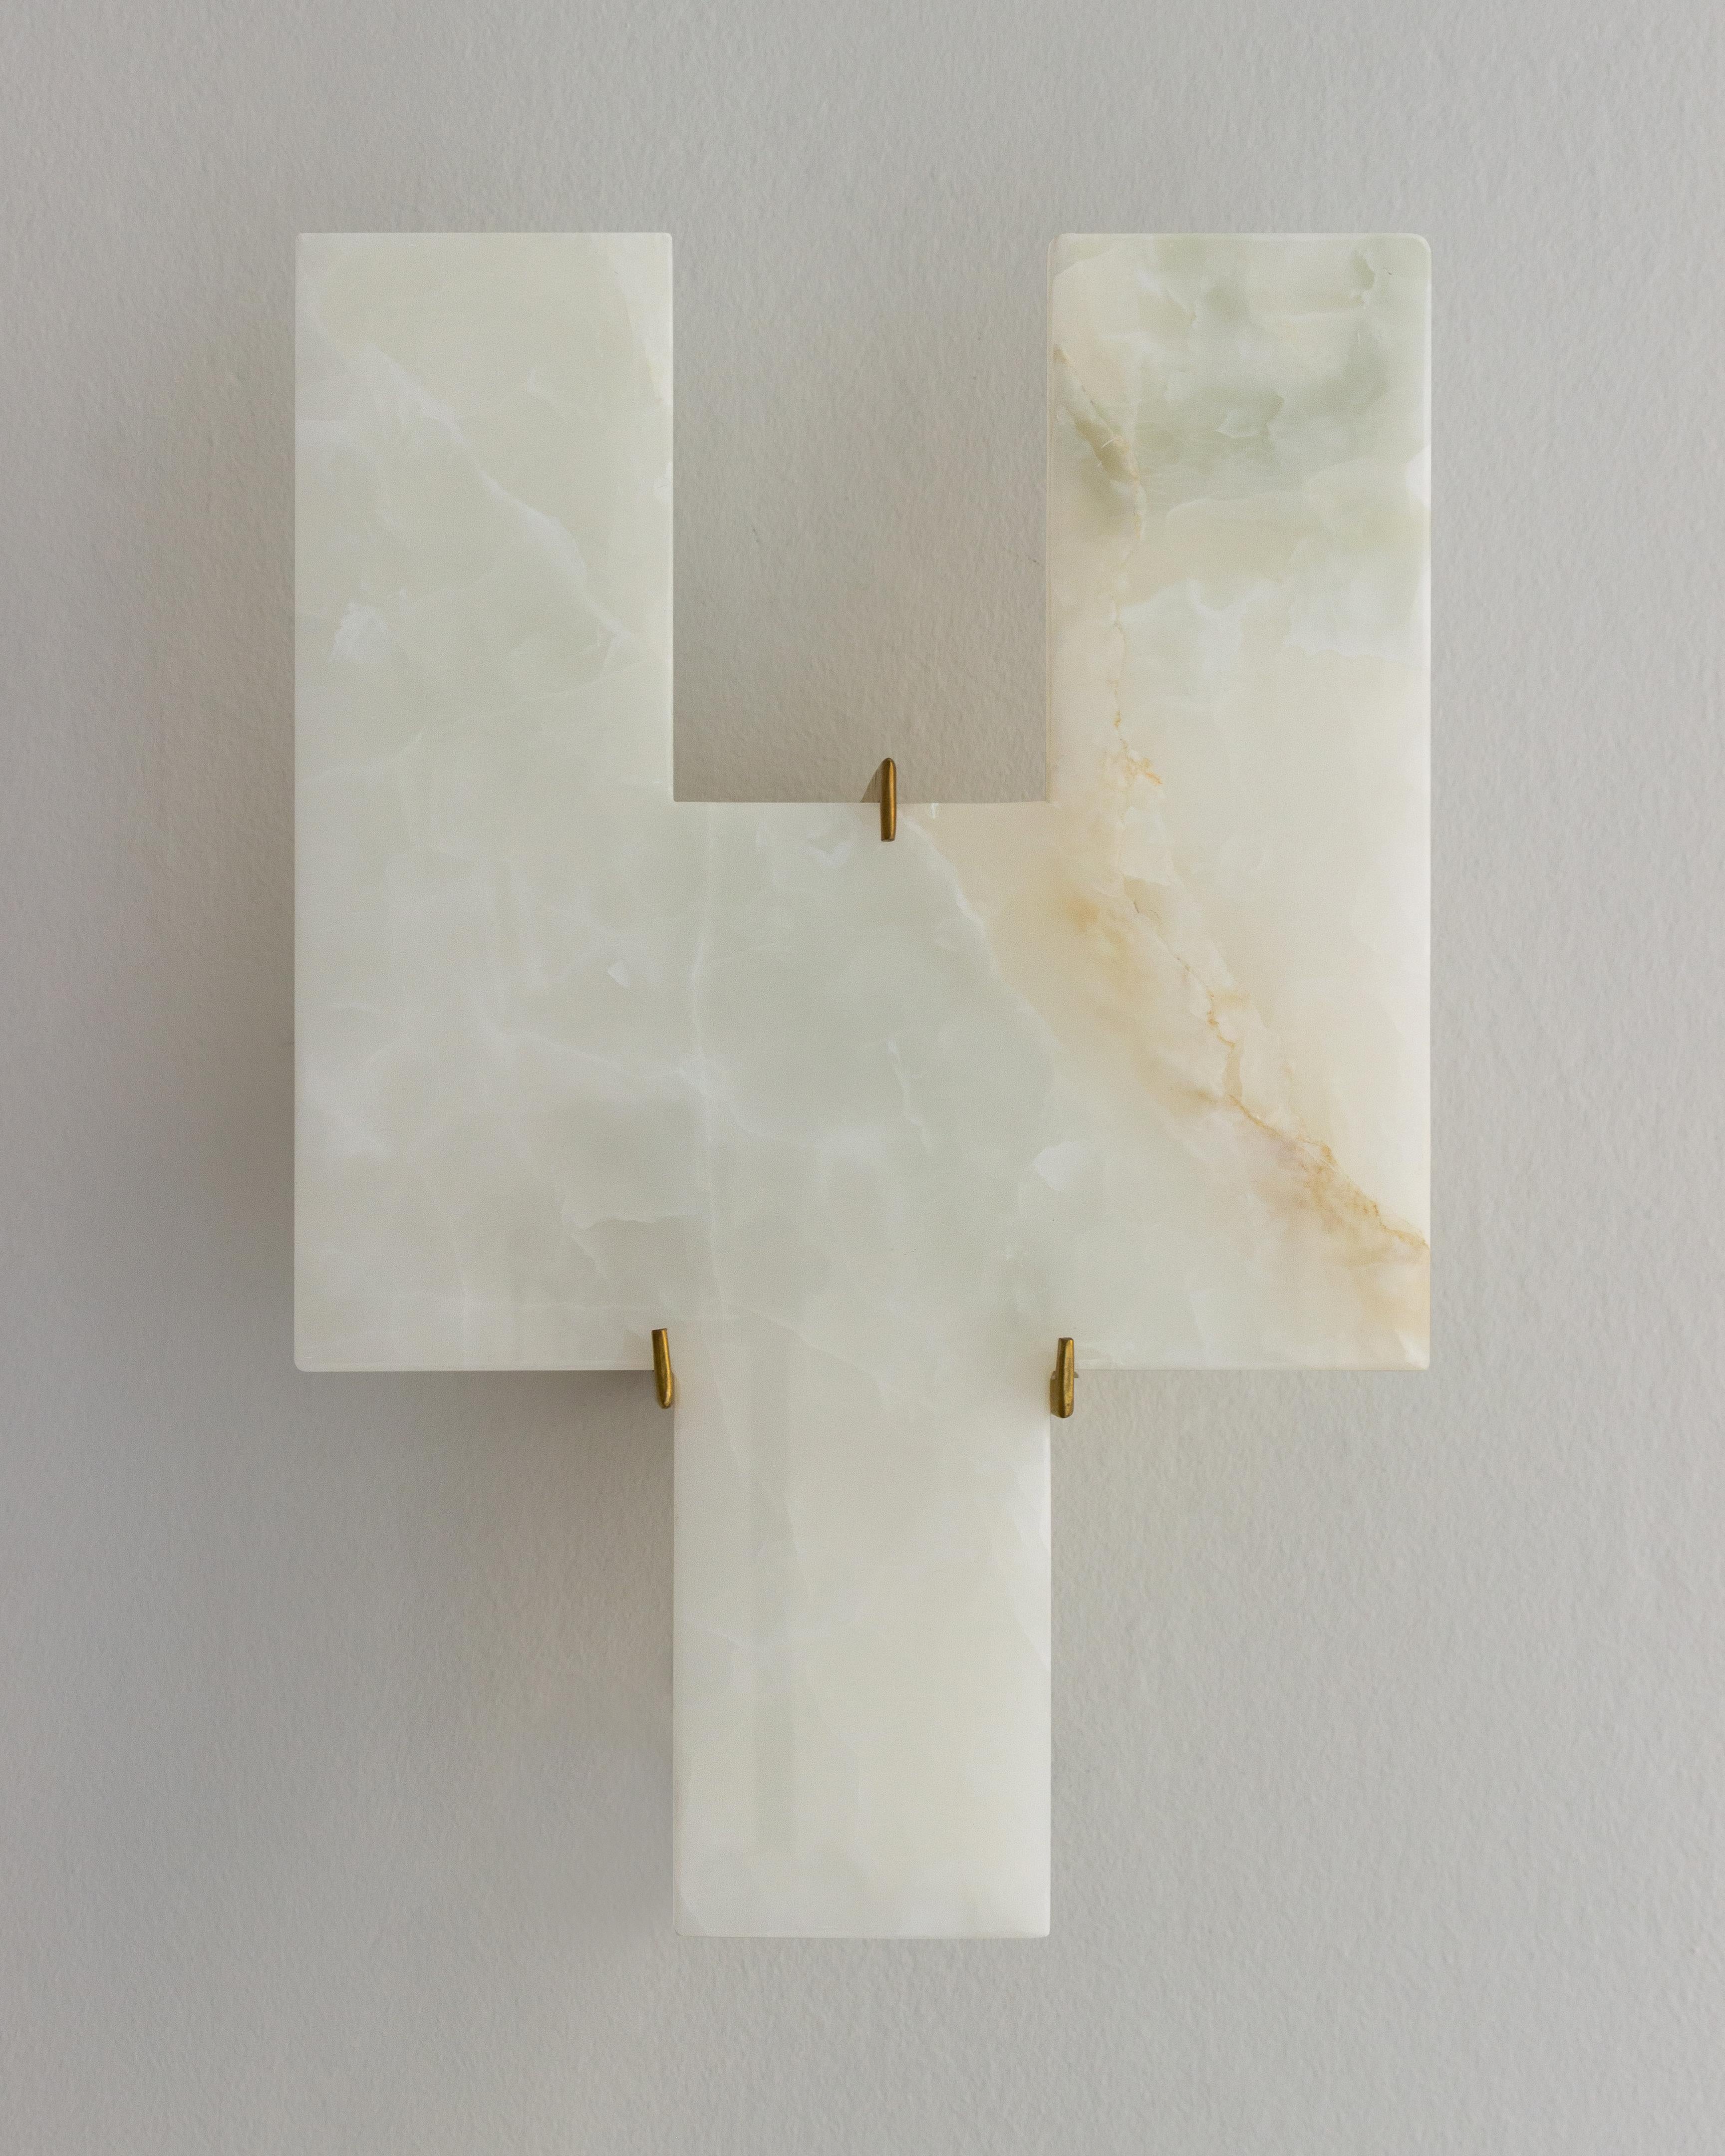 Brick Onyx Wall Lamp by Nana Zaalishvili
Dimensions: D 15 x W 30 x H 45 cm.
Materials: Onyx and brass.

‘Brick’ is the first attempt by Idaaf Architects workshop to create a new building material. White the process of selecting its textures is at